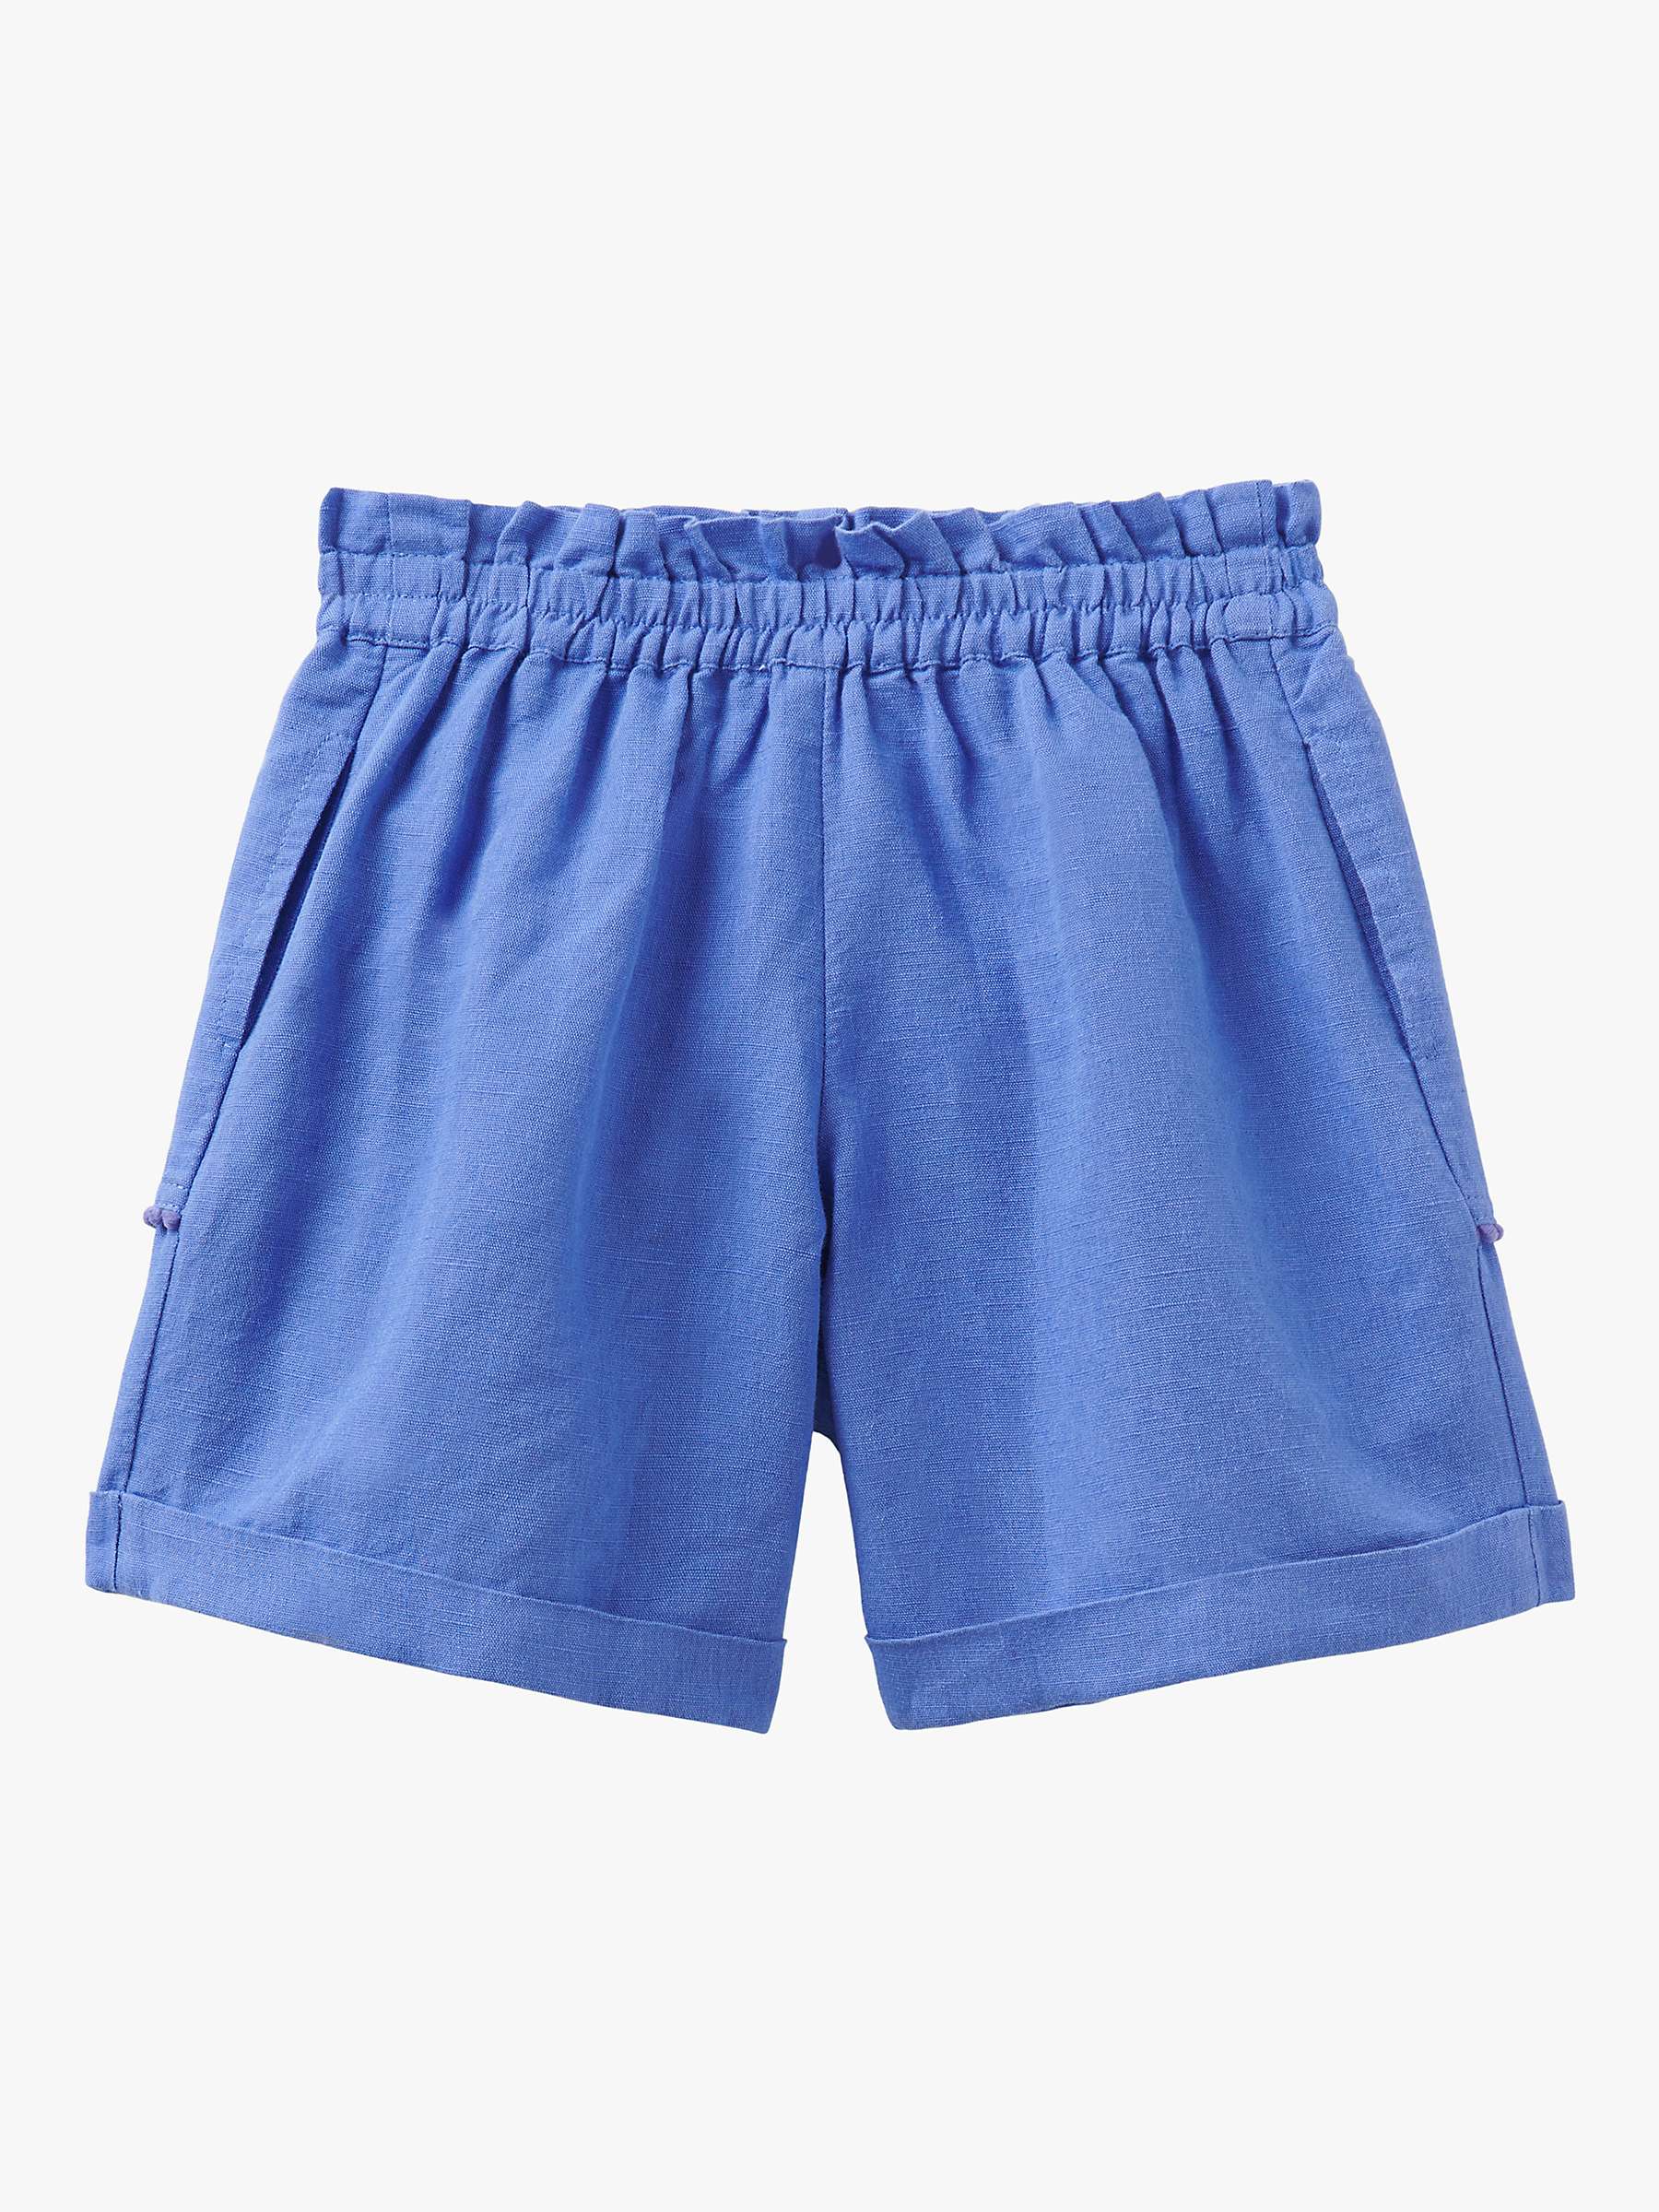 Buy Crew Clothing Kids' Paperbag Linen and Cotton Shorts, Blue Online at johnlewis.com